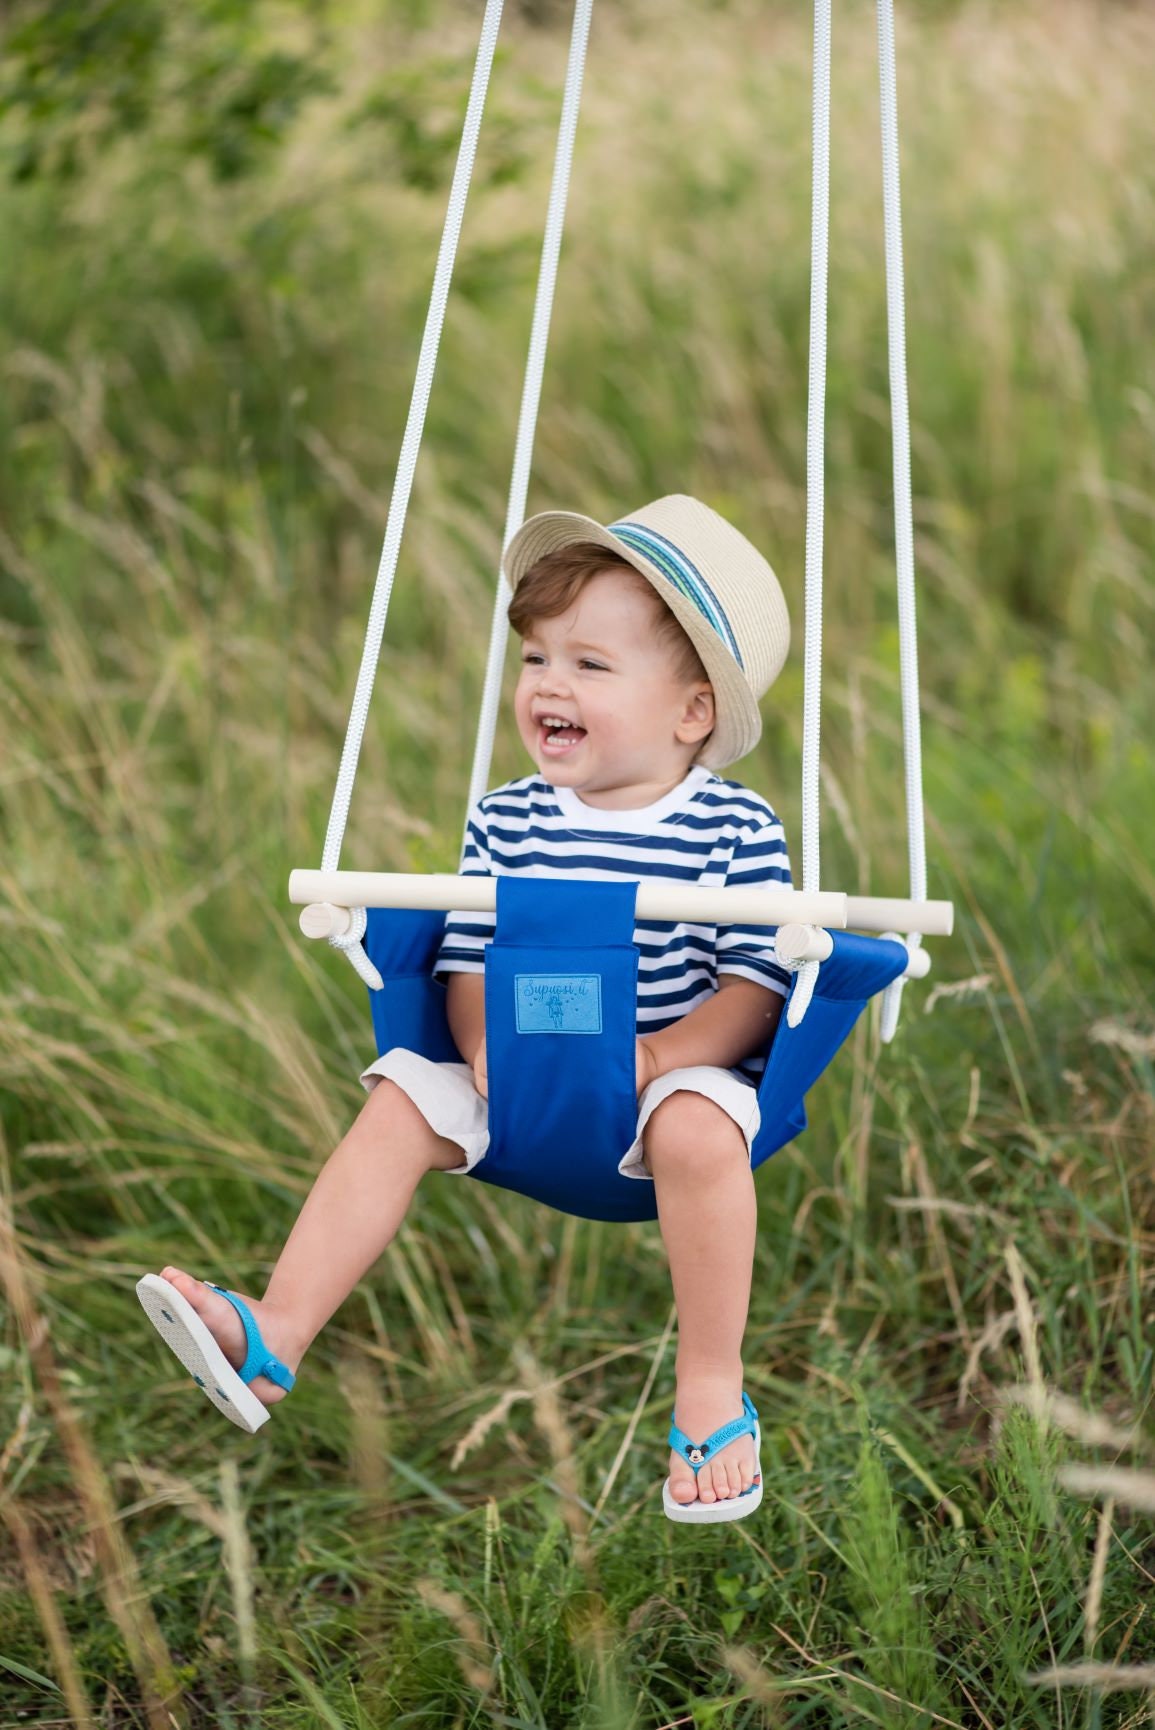 Toddler Swings Seat Baby Hanging Swing Seat,Toddler Secure Indoor & Outdoor Chair Toy Heavy Duty Swing Seat With Safety Belt For Infants Backyard From US, Blue 